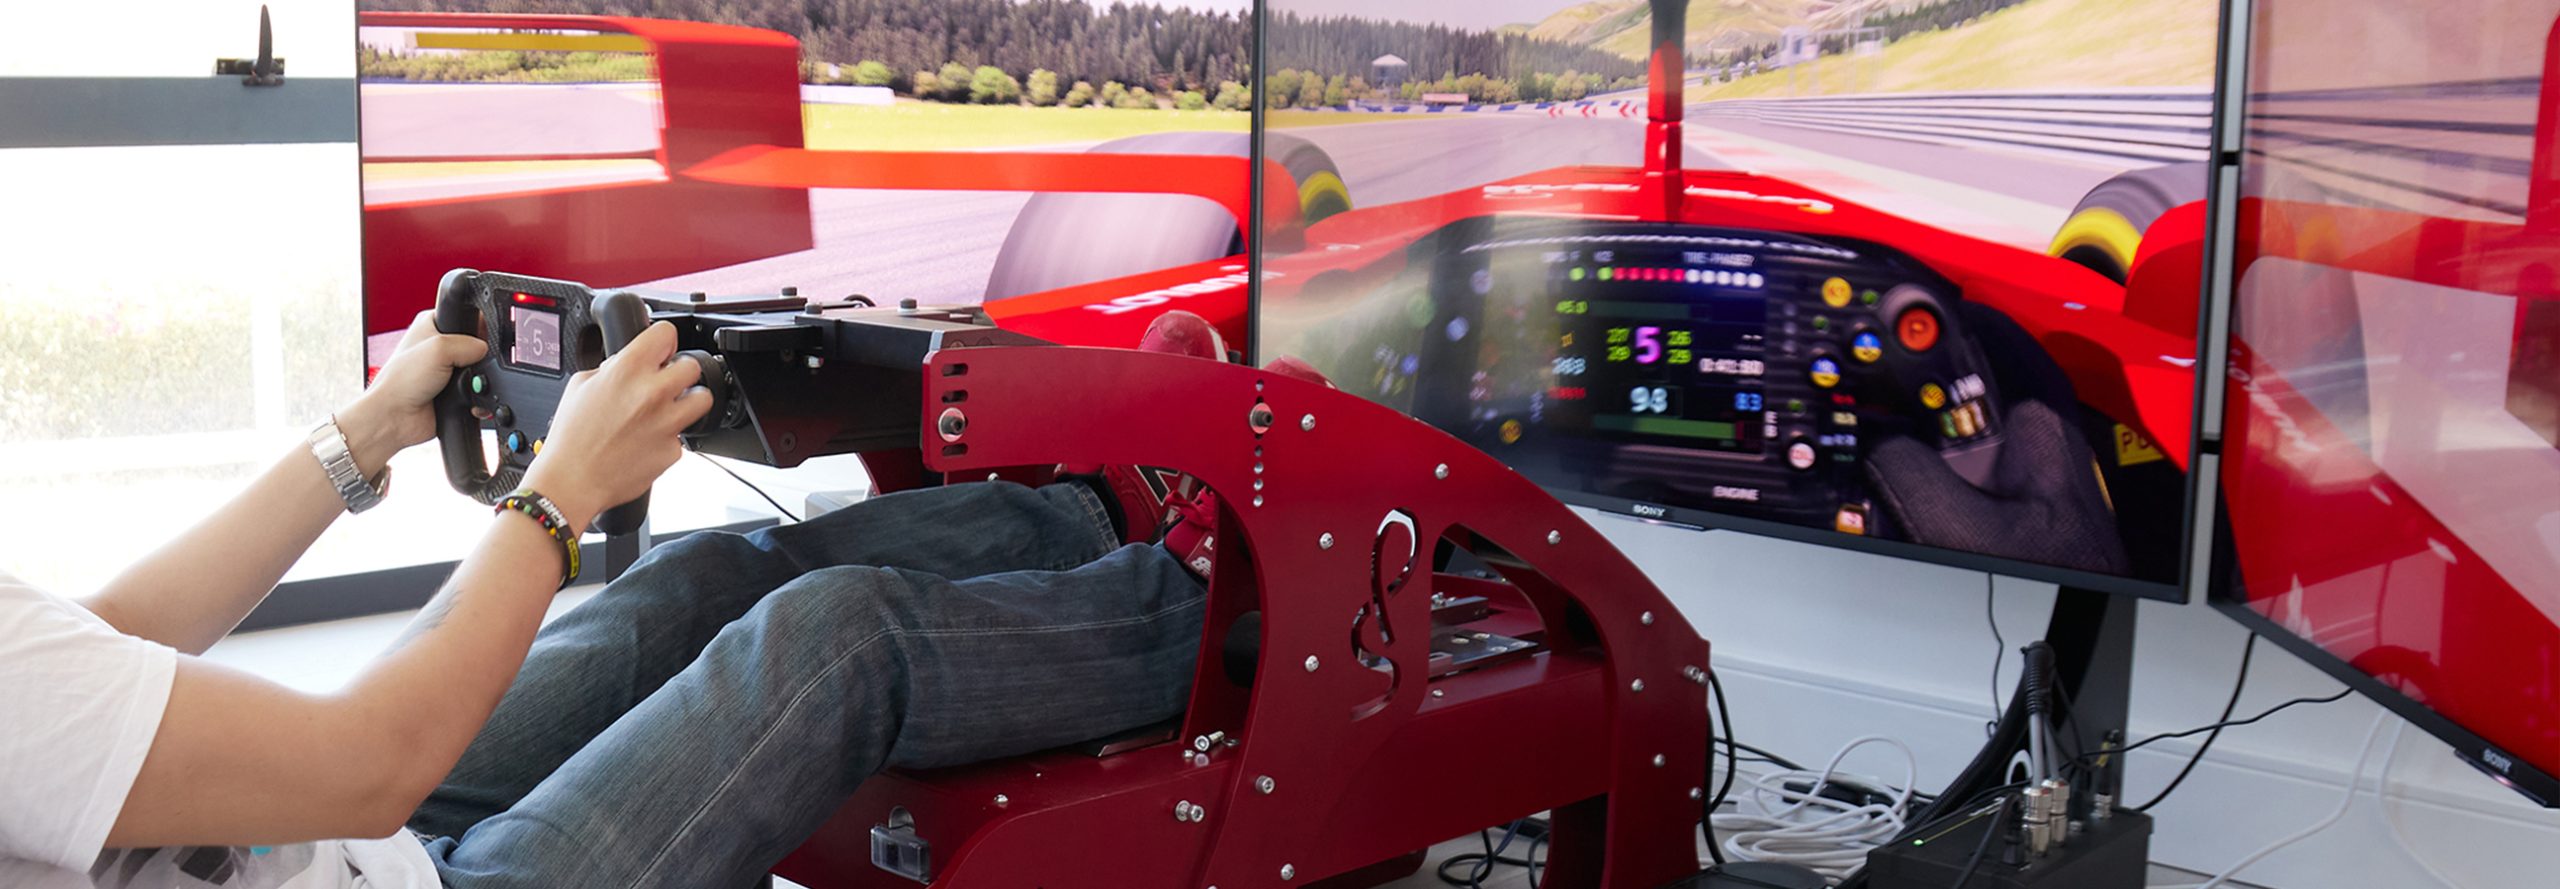 F1 simulator in red with three wide screen monitor.